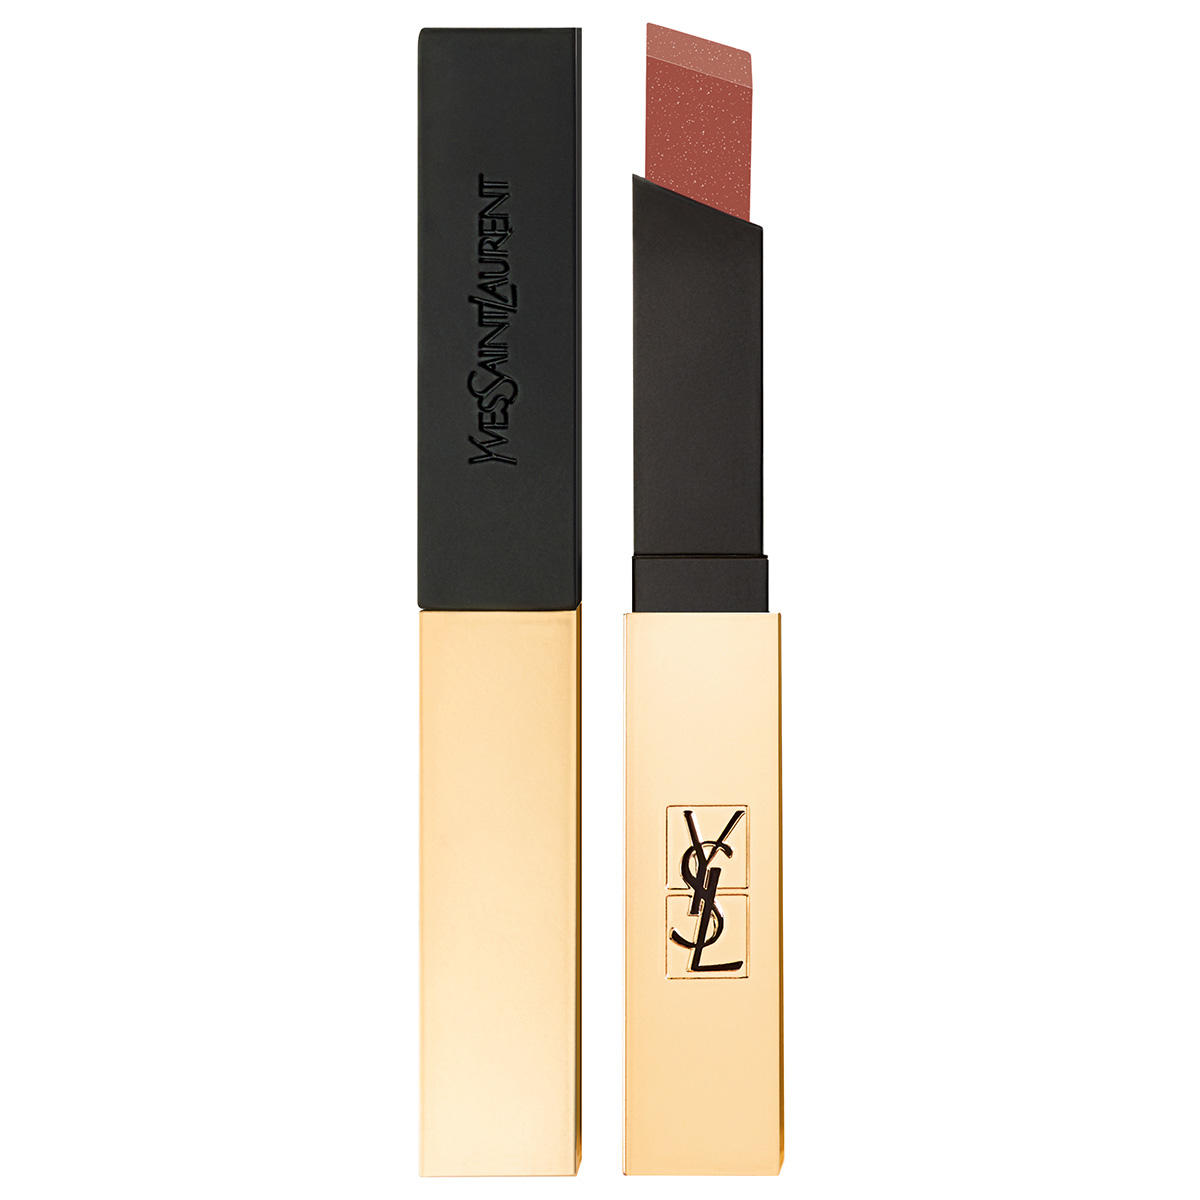 Yves Saint Laurent Rouge Pur Couture Il rossetto sottile 36 Pulsating Resewood 3 g Respirazione pulsante